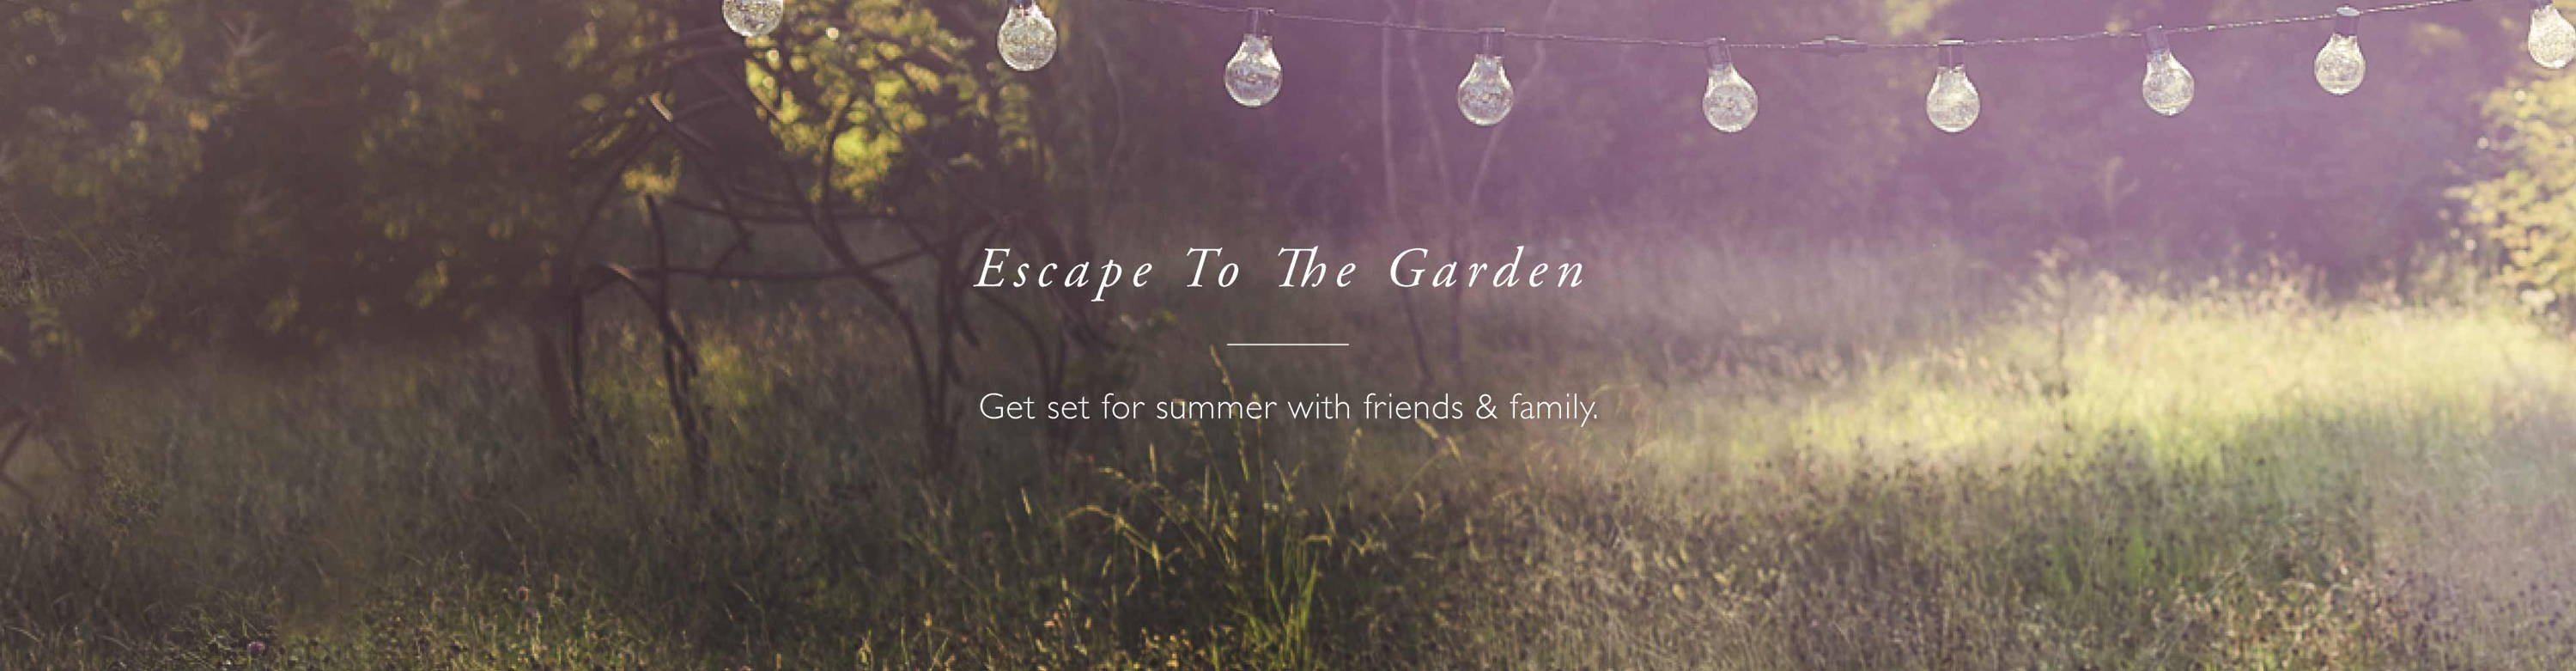 Escape to the garden forest image